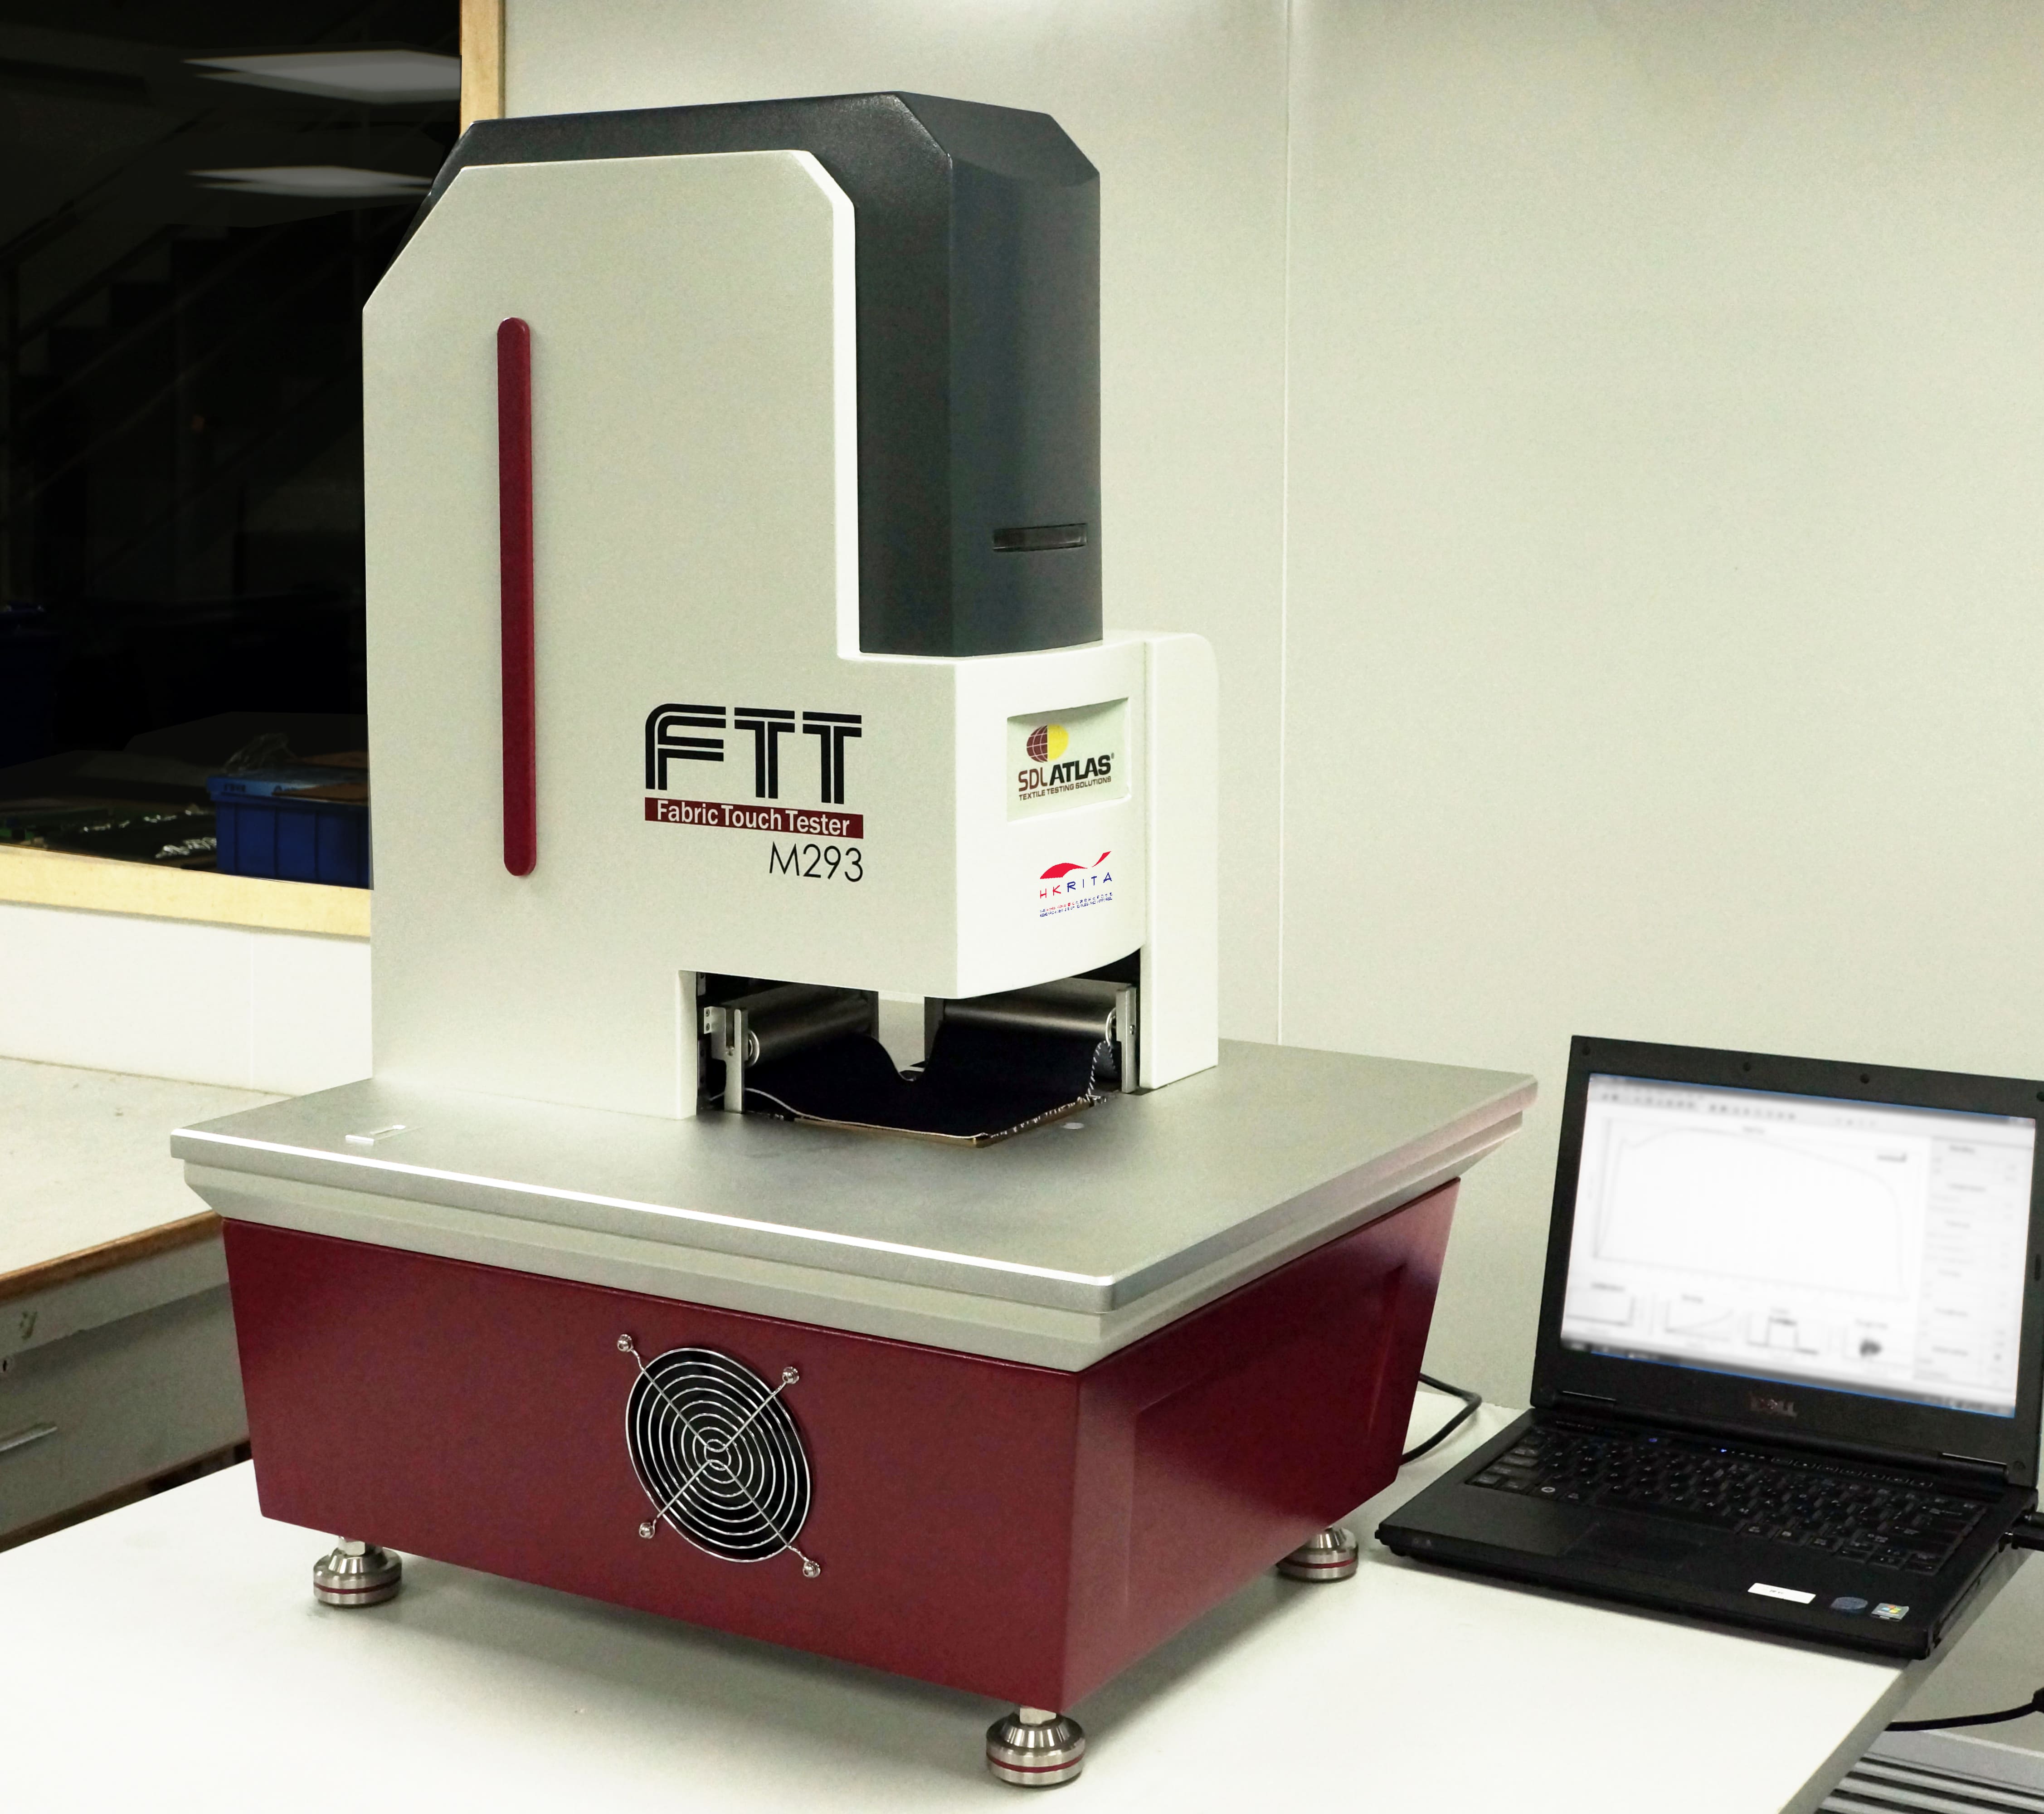 FTT®: Fabric Touch Tester, Textile Testing Products